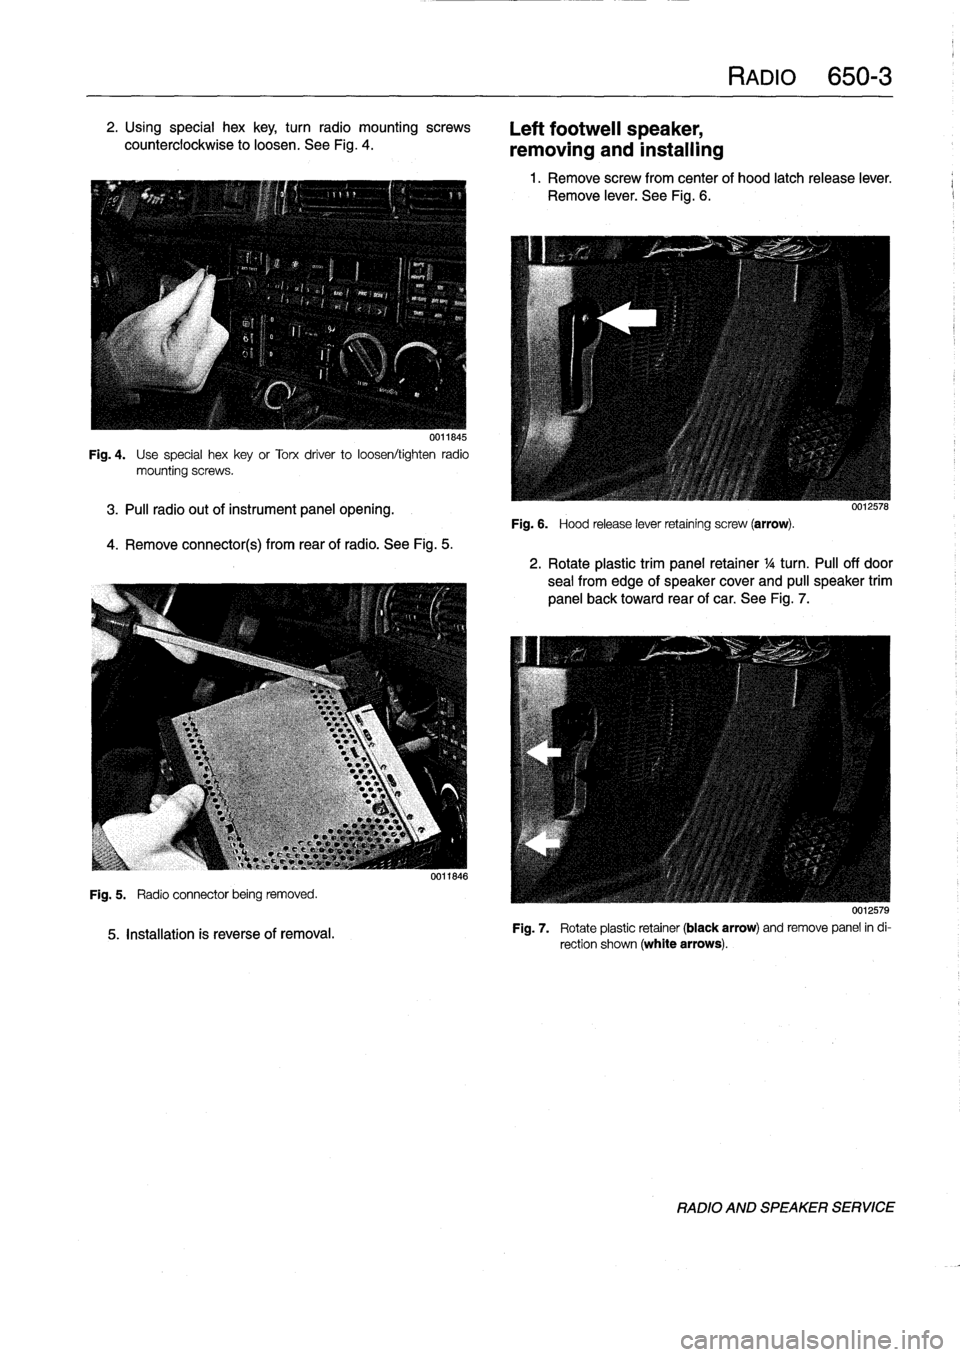 BMW 318i 1998 E36 Workshop Manual 2
.
Using
special
hex
key,
turn
radio
mountingscrews

counterclockwise
to
loosen
.
See
Fig
.
4
.

0011845

Fig
.
4
.

	

Use
special
hexkey
or
Torx
driver
to
loosen/tighten
radio
mountingscrews
.

3
.